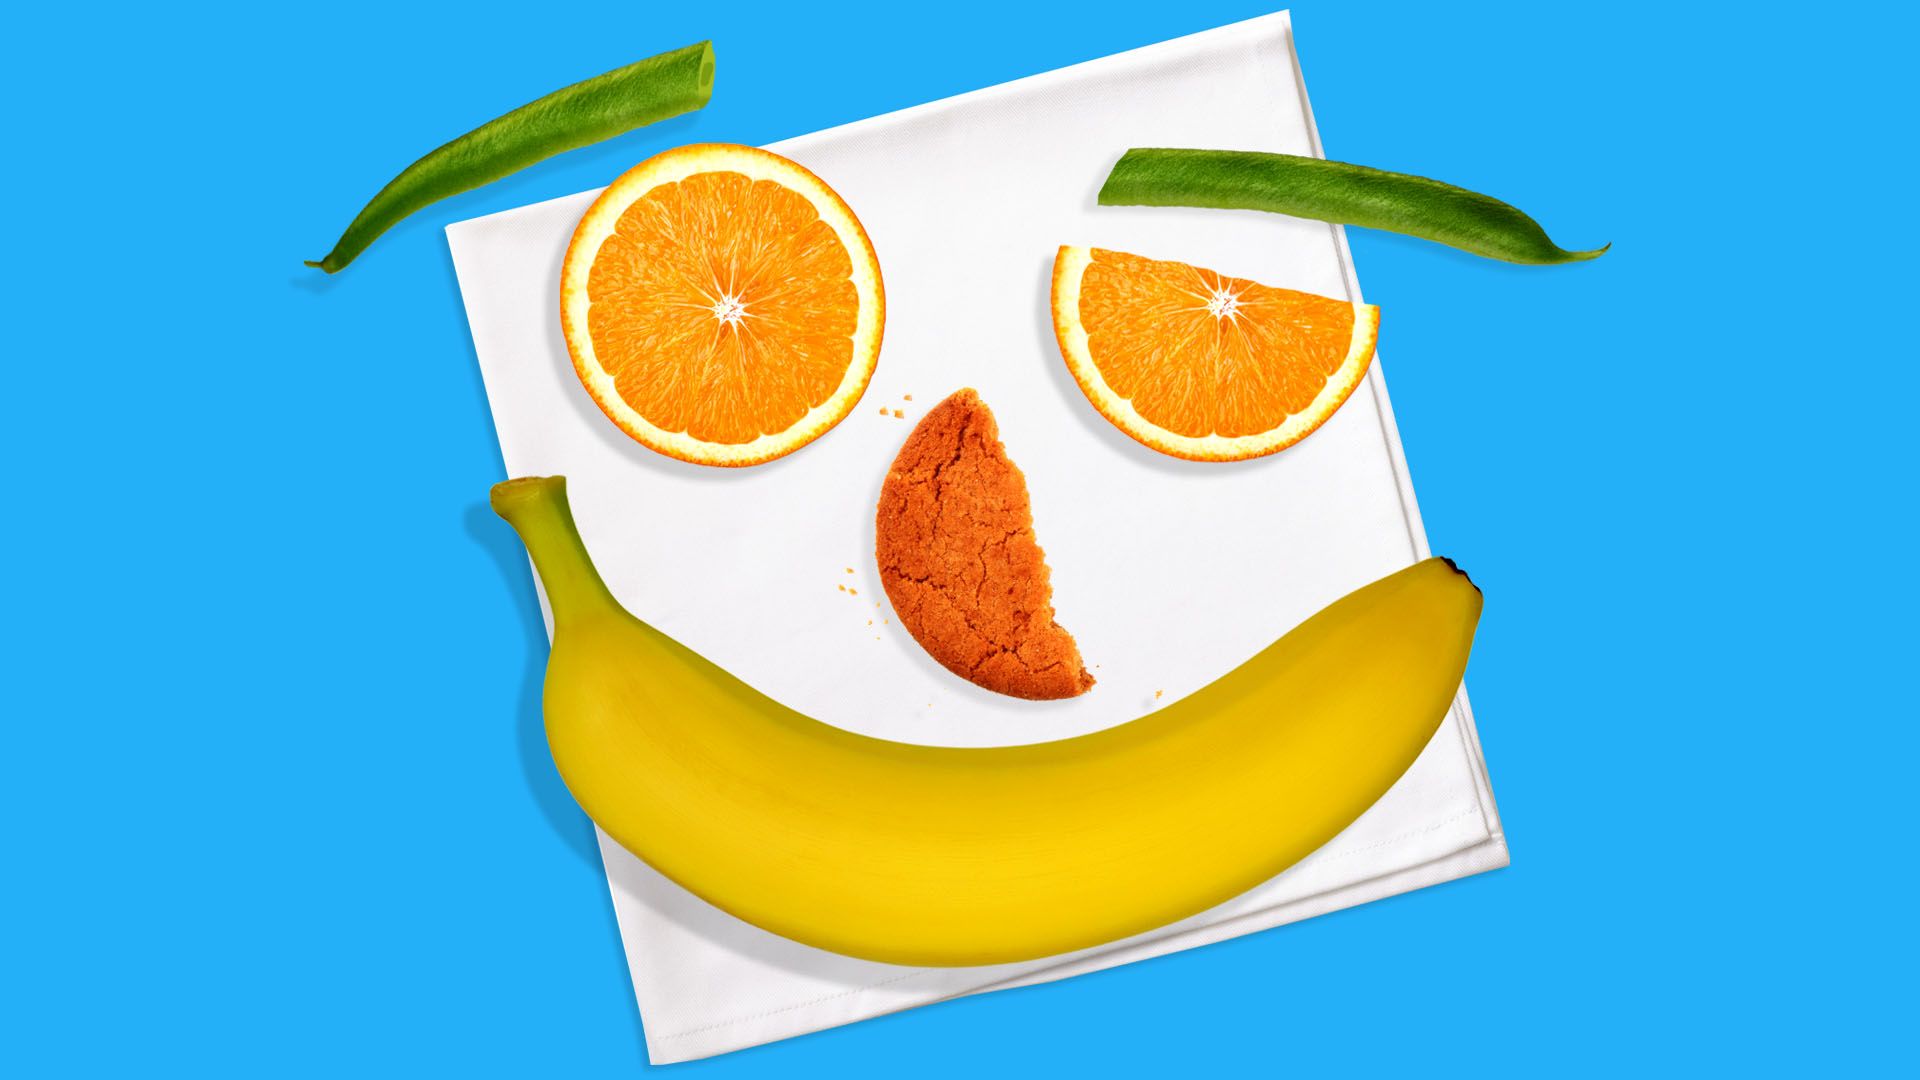 Illustration of a lunch shaped like a smiling face